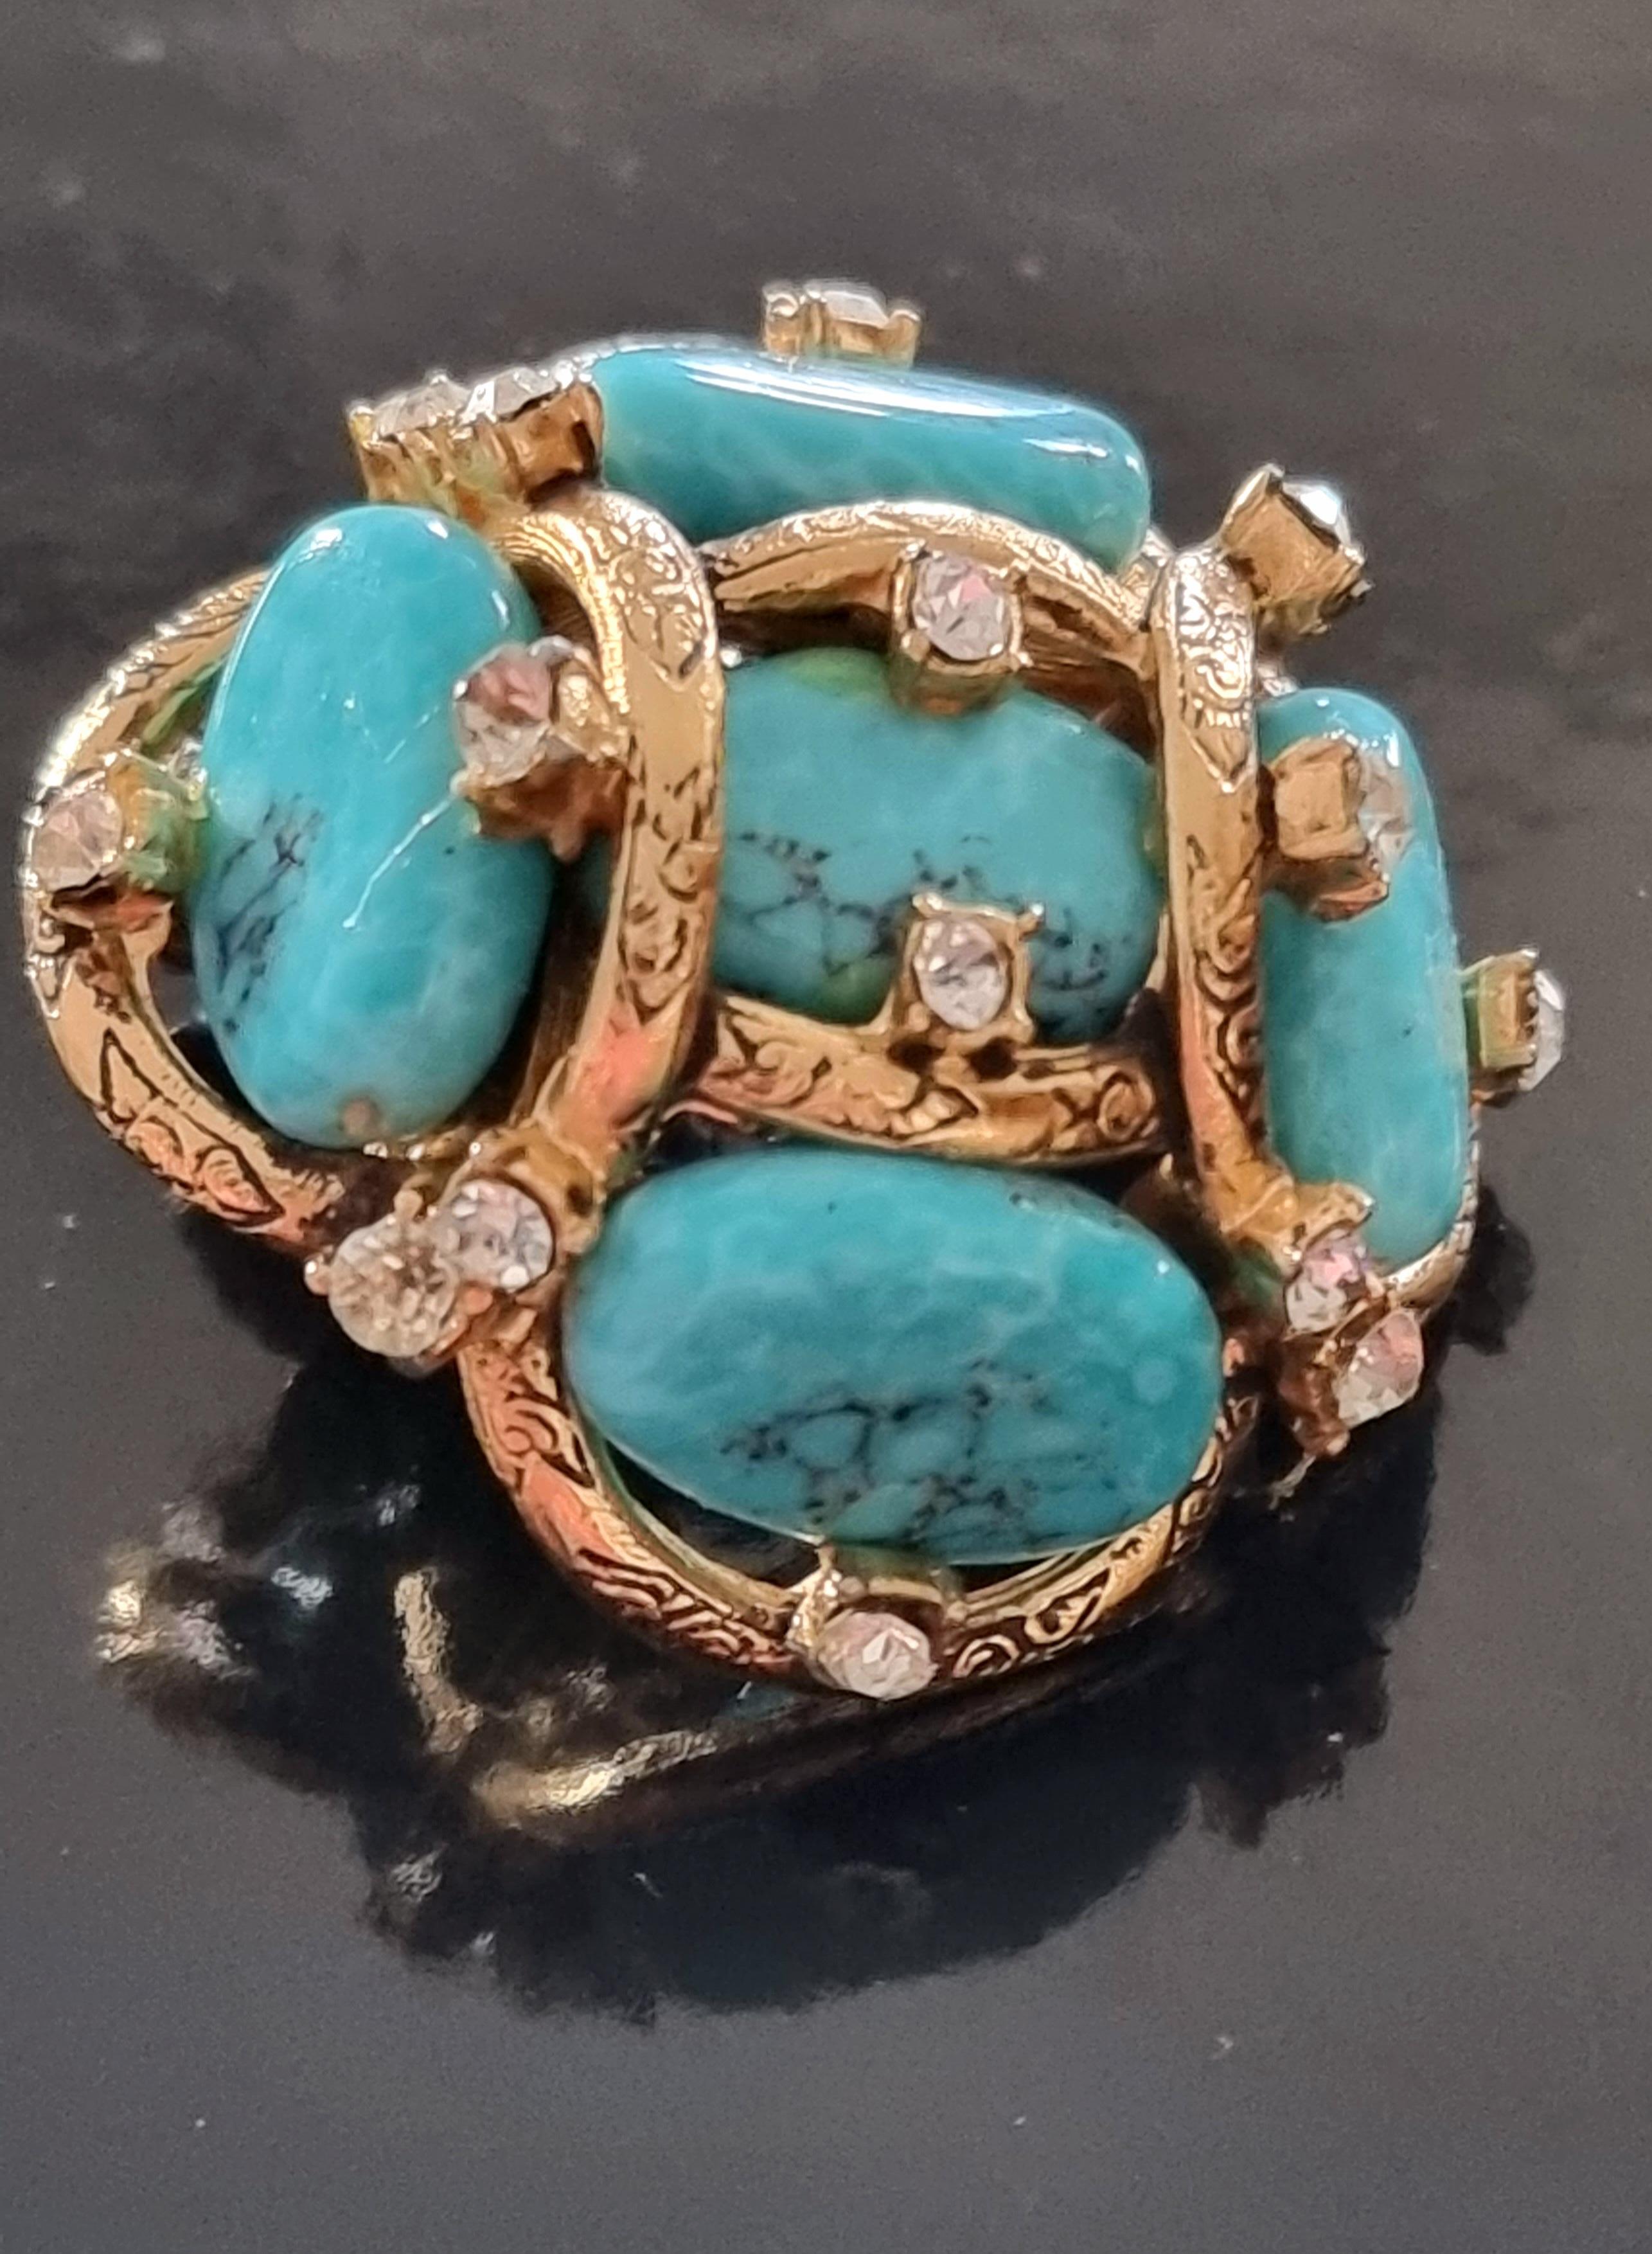 Magnificent old BROOCH,
vintage from the 60s,
made by Robert Goossens for Chanel in 1961,
similar model in “Les Bijoux de Chanel” by Patrick Mauries p.68,
similar models seen on sale at the Great Auction Houses,
dimensions 4.8 x 4.8 cm, weight 42